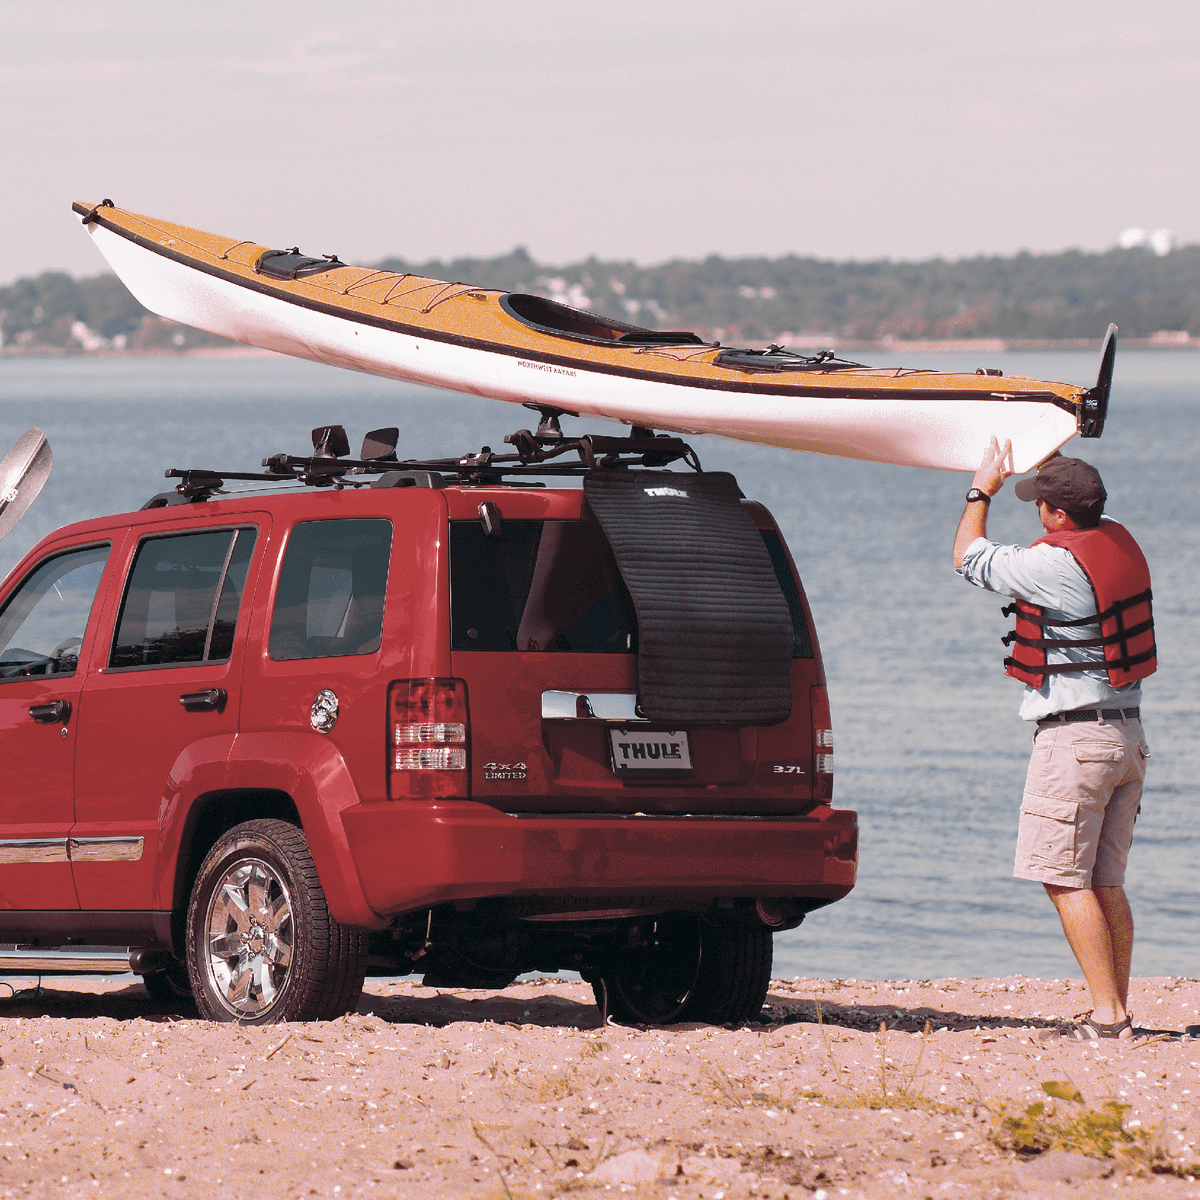 A man is loading a kayak on a Thule WaterSlide kayak carrier on his car